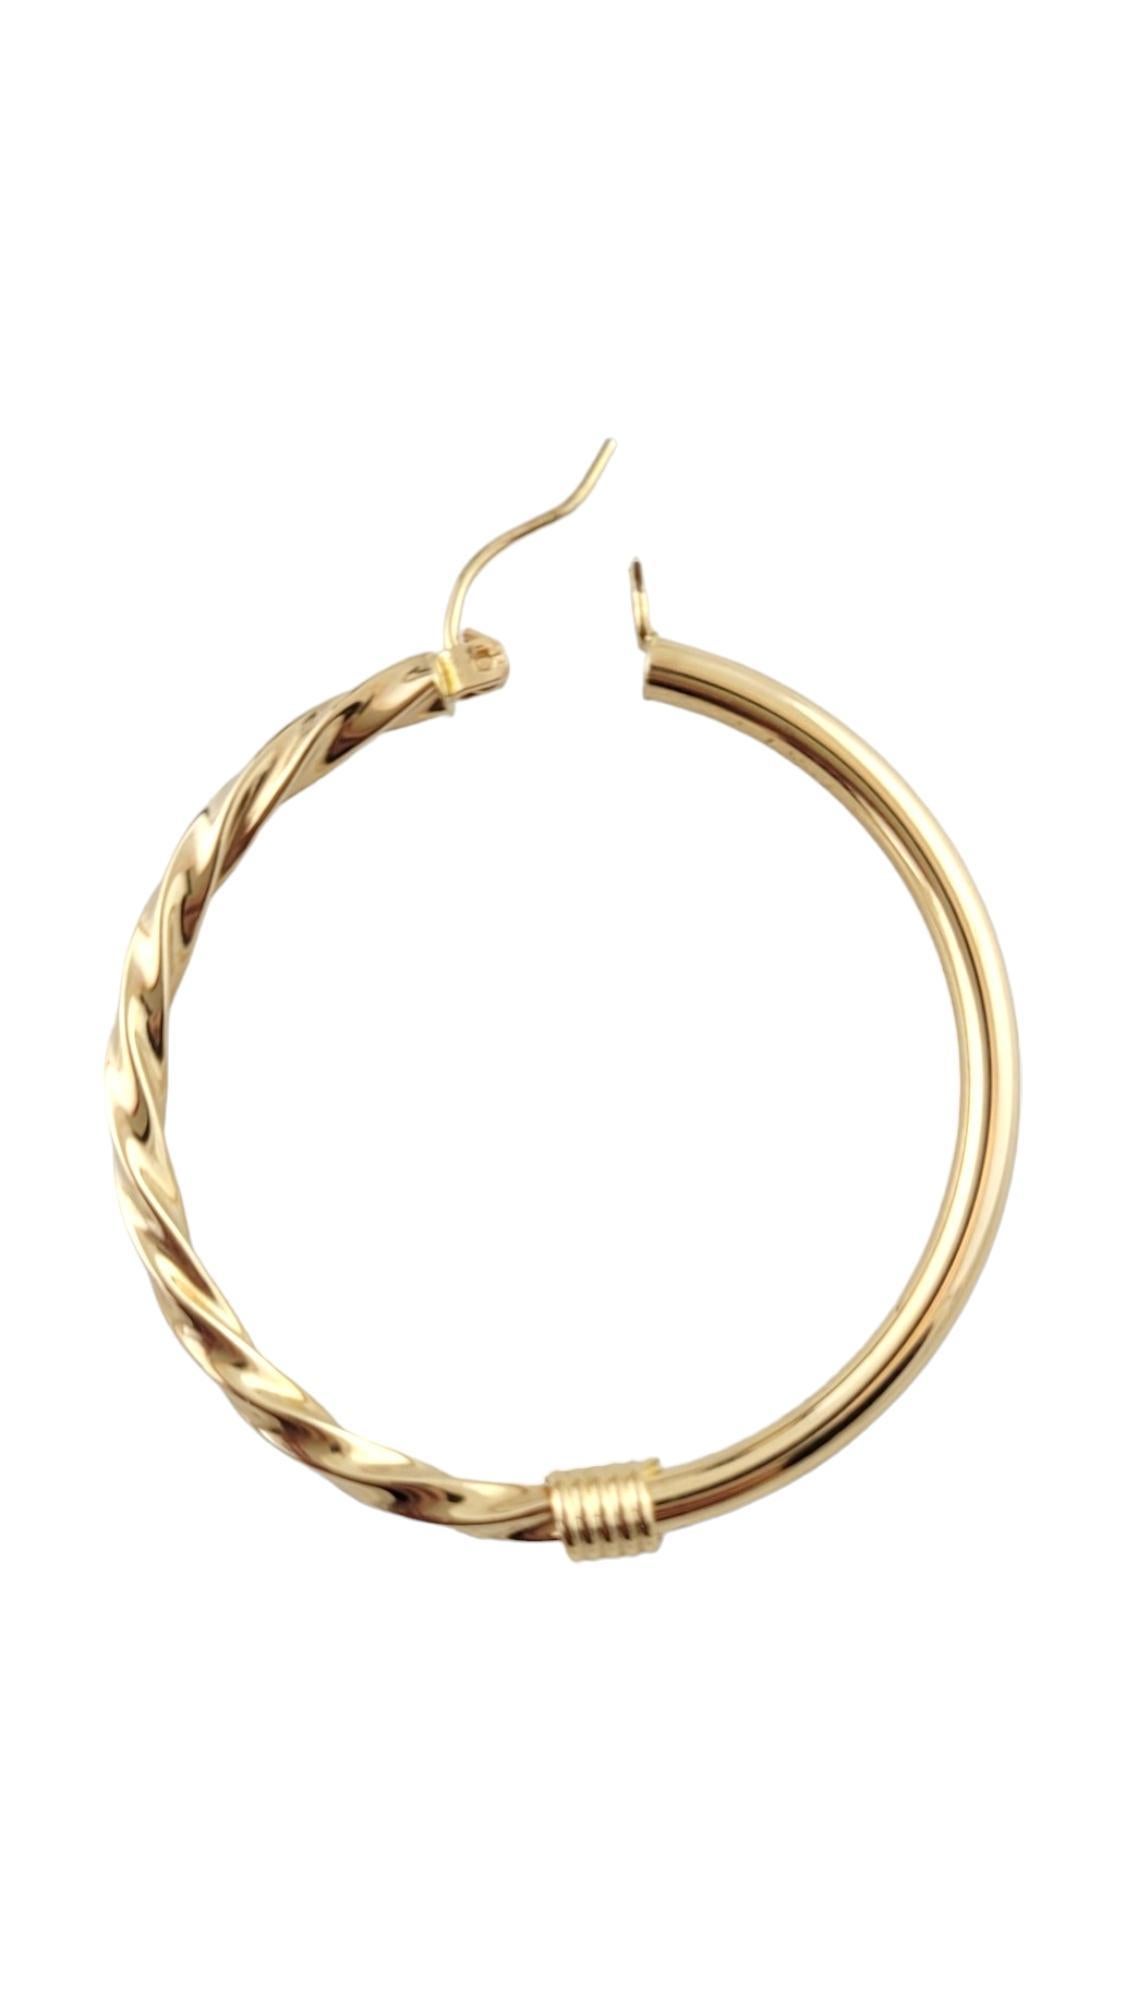 Women's 14K Yellow Gold Twisted/ Smooth Hoop Earrings #16139 For Sale